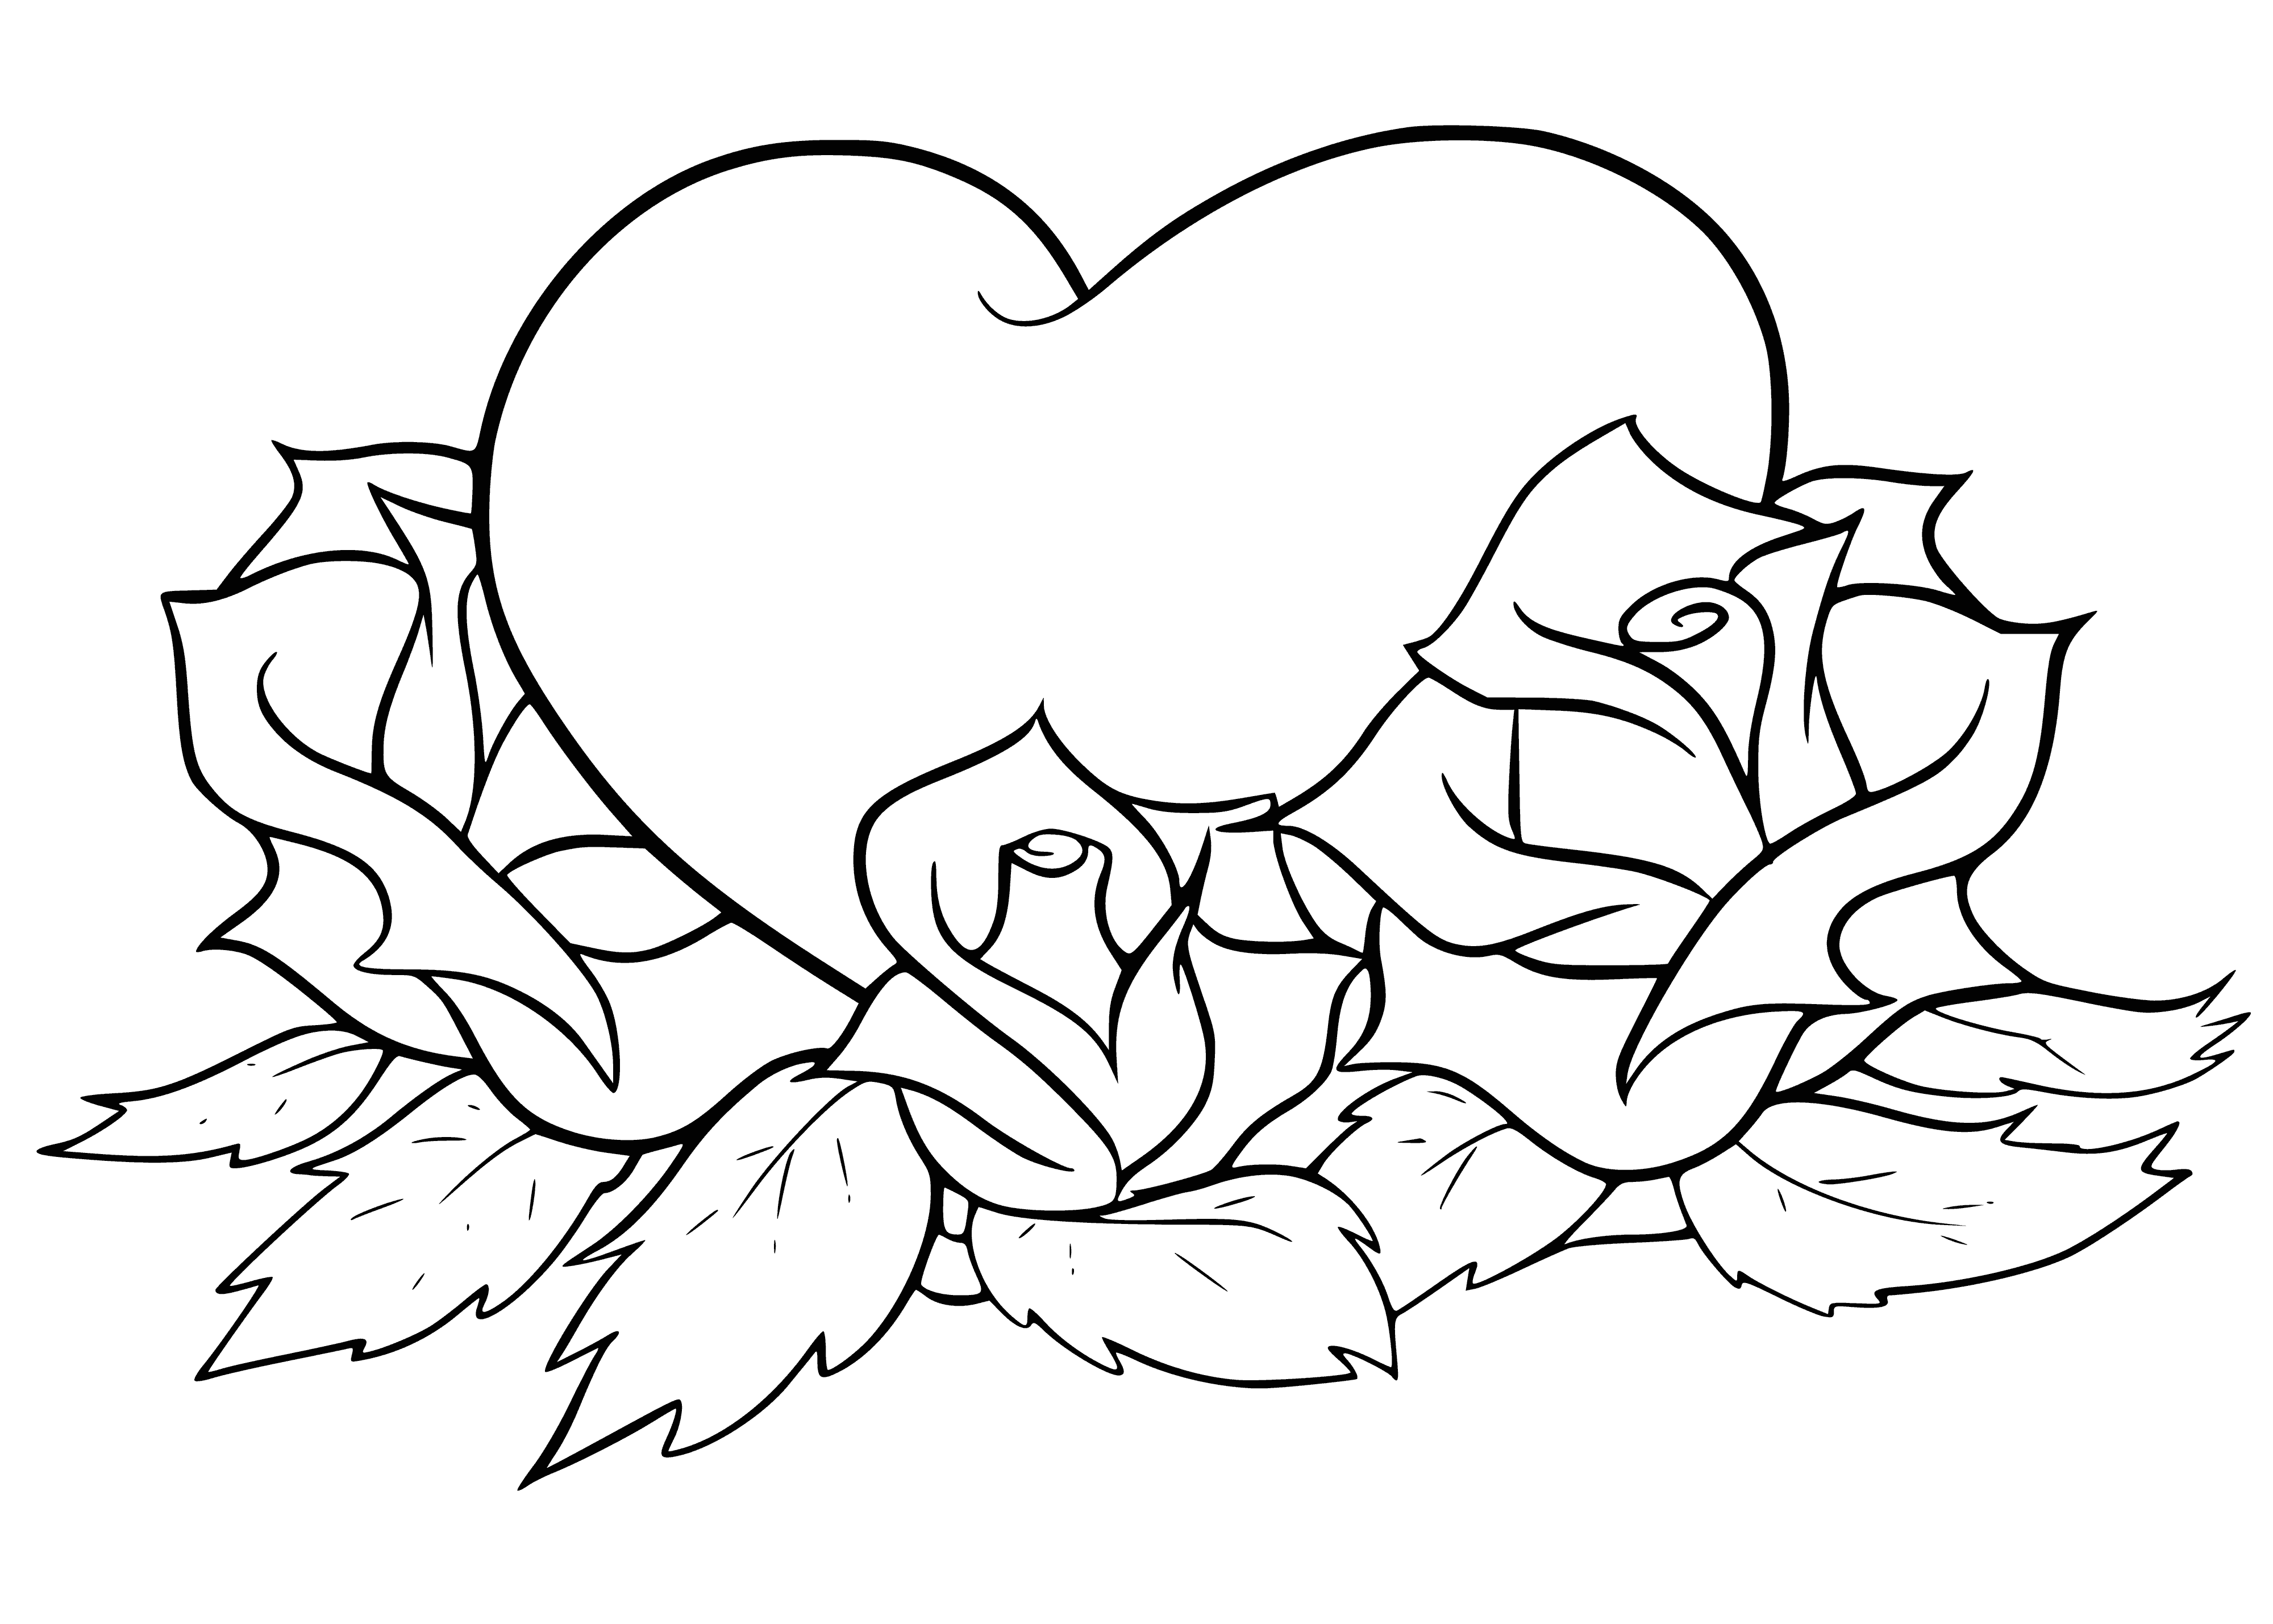 Heart in roses coloring page